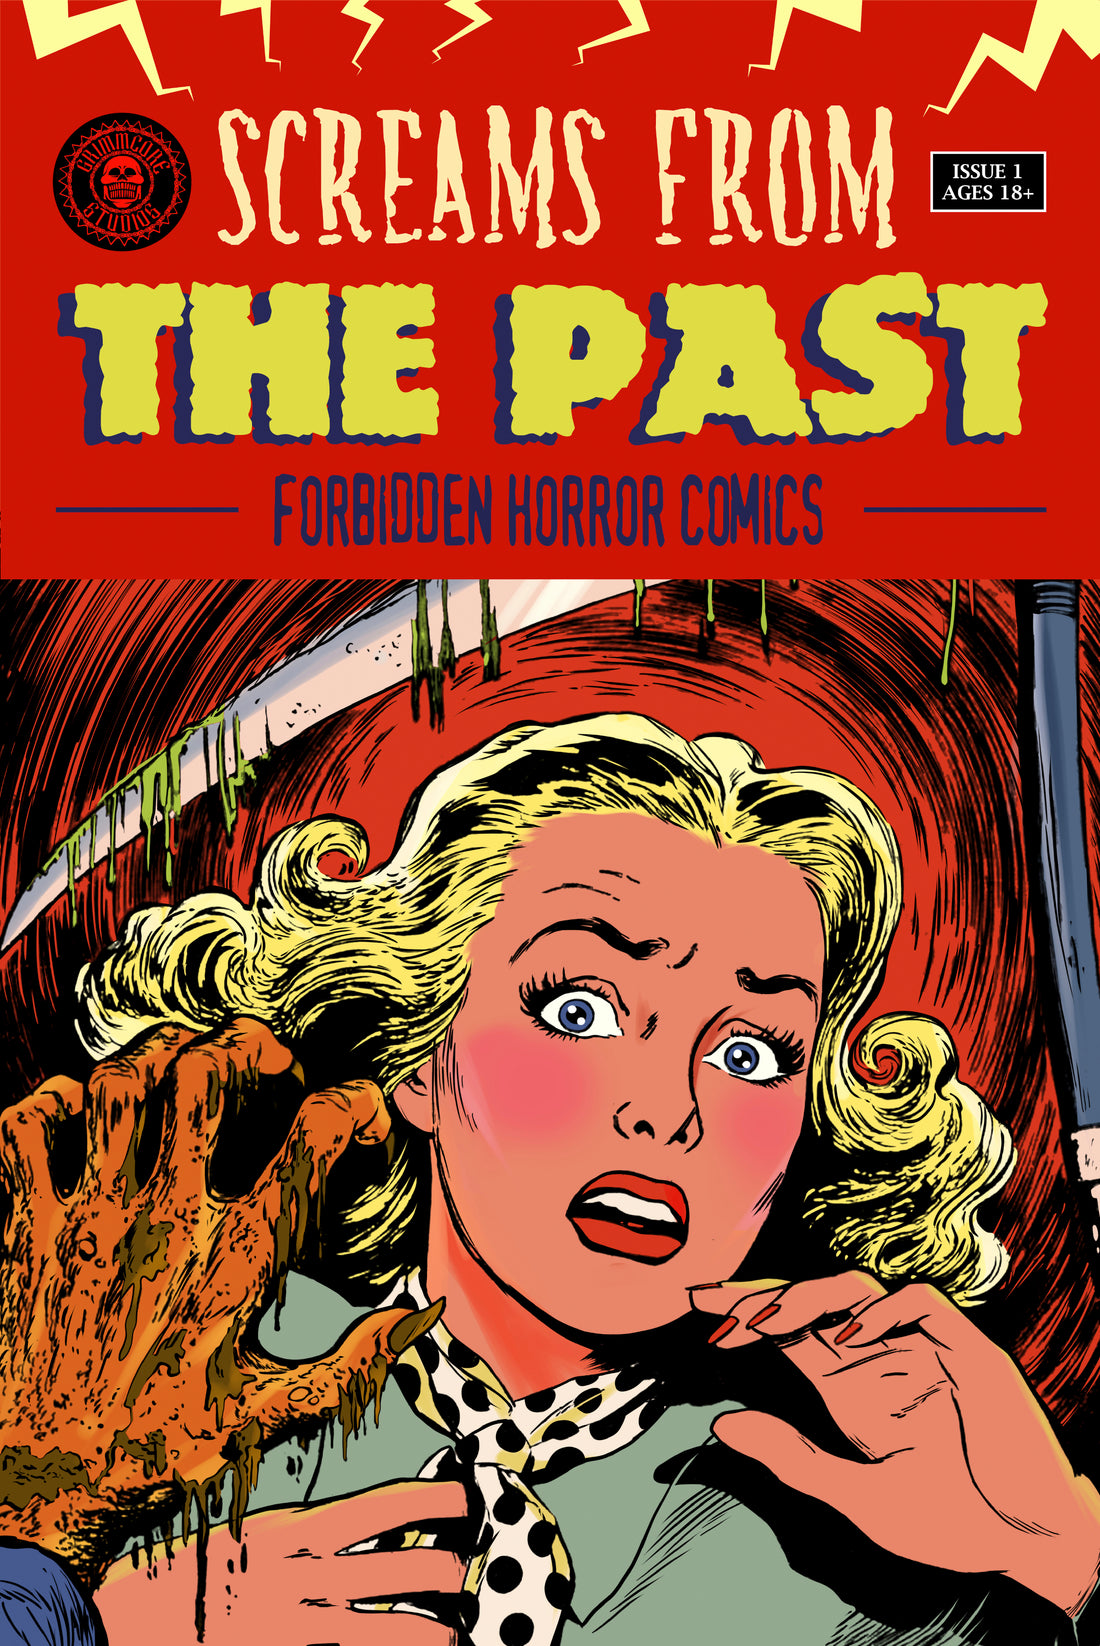 Screams from the Past - Forbidden Horror Comics from the 1950s